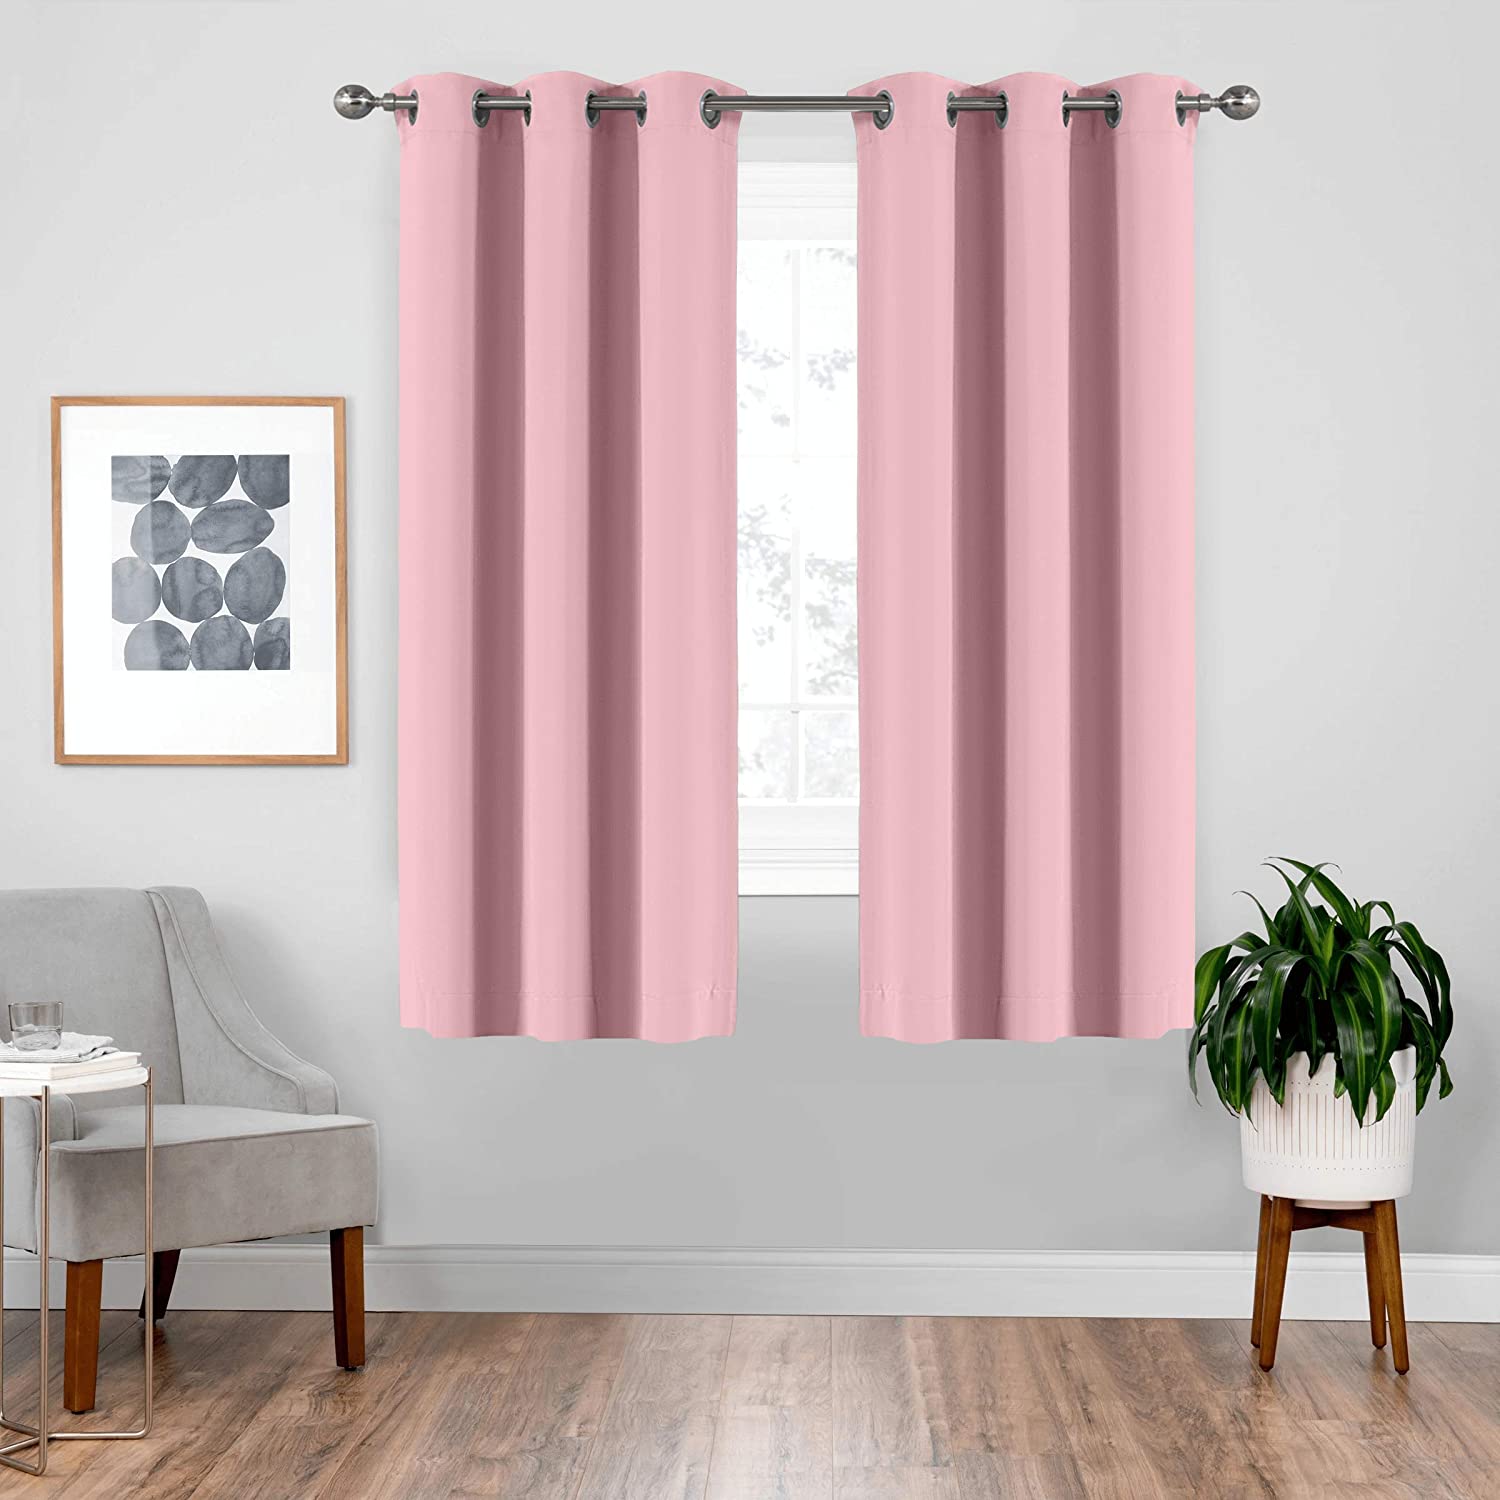 downluxe Room Darkening Grommet Curtains @ Amazon 48% off AC / Free Prime Shipping $14.99